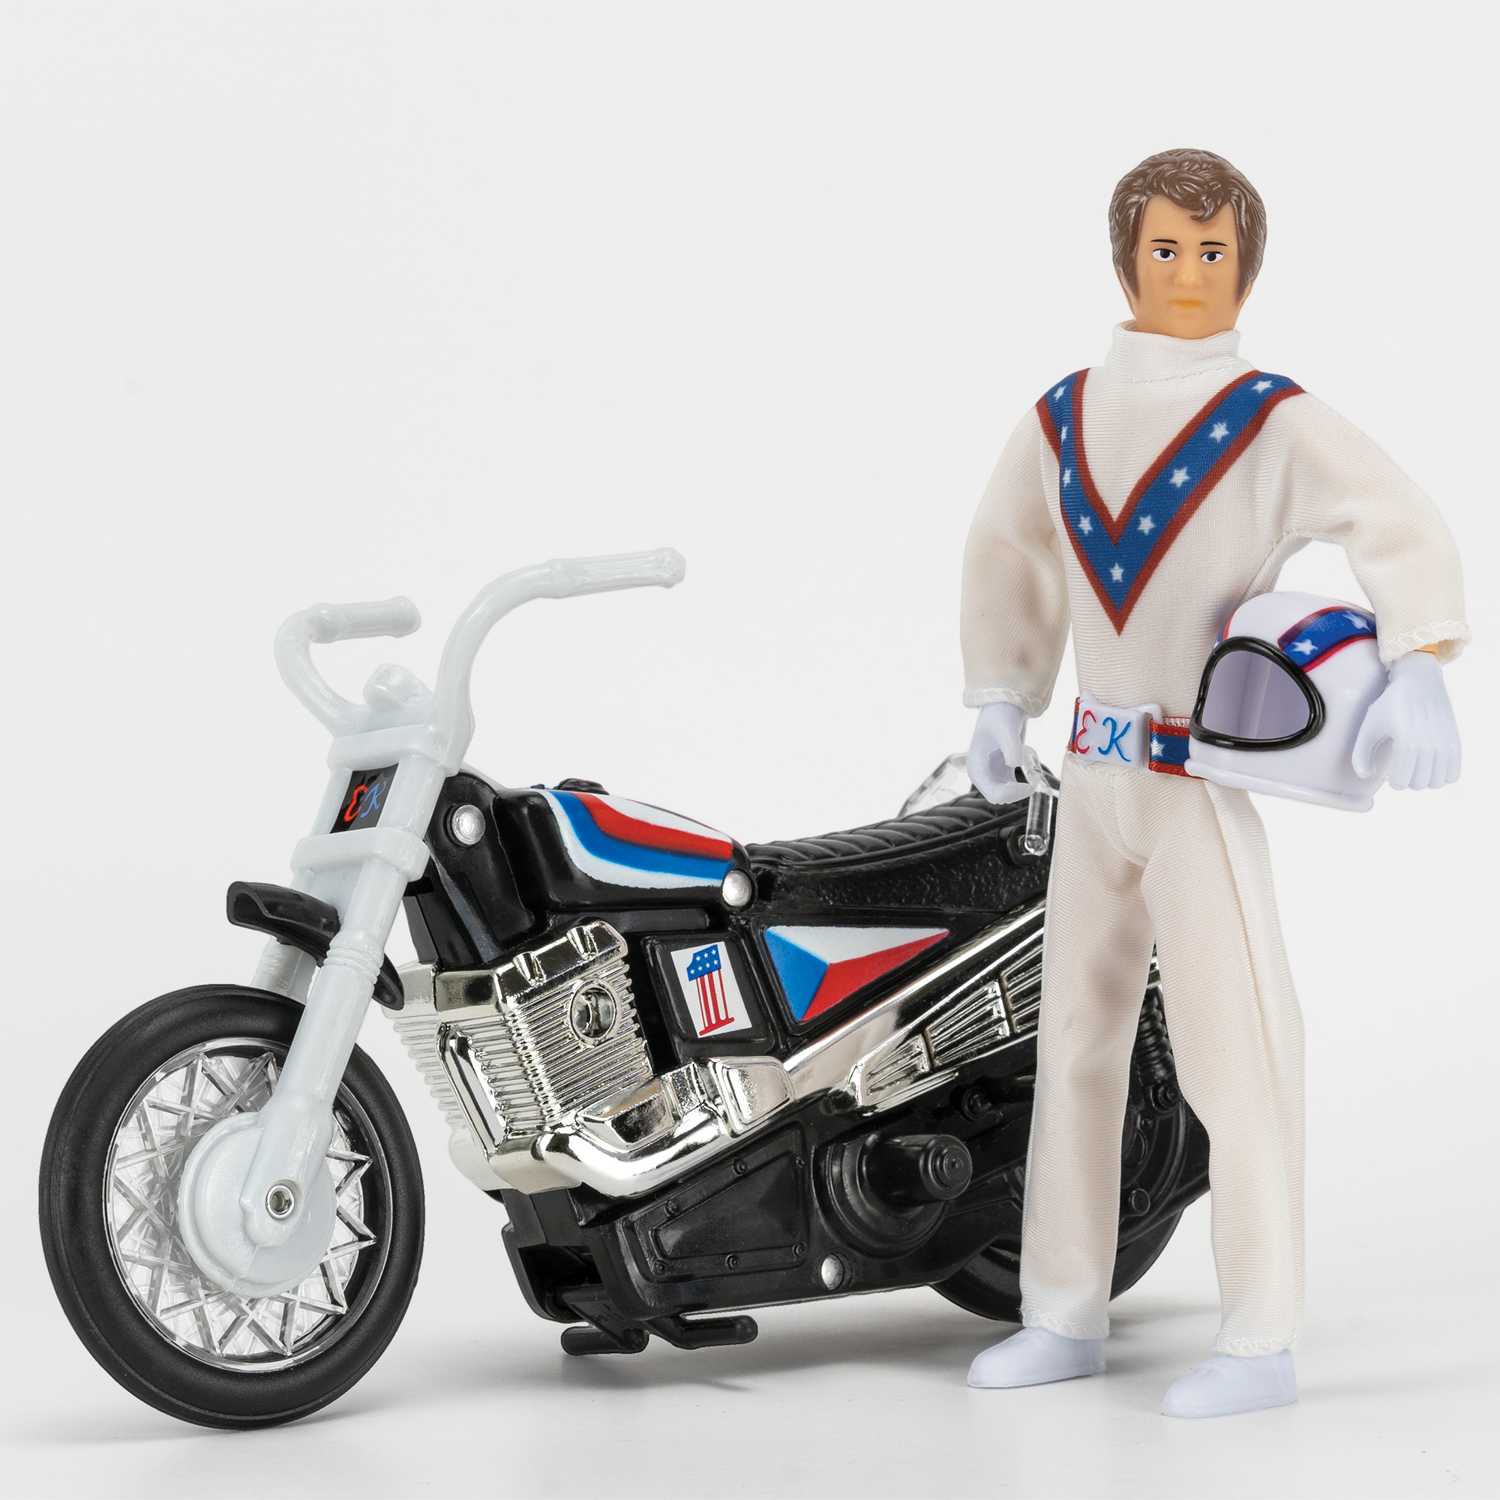 Evel Knievel Stunt Cycle: Ultimate Action Toy for Jumps, Crashes, Flips 8 Inch Bike 1970's Original - image 4 of 7